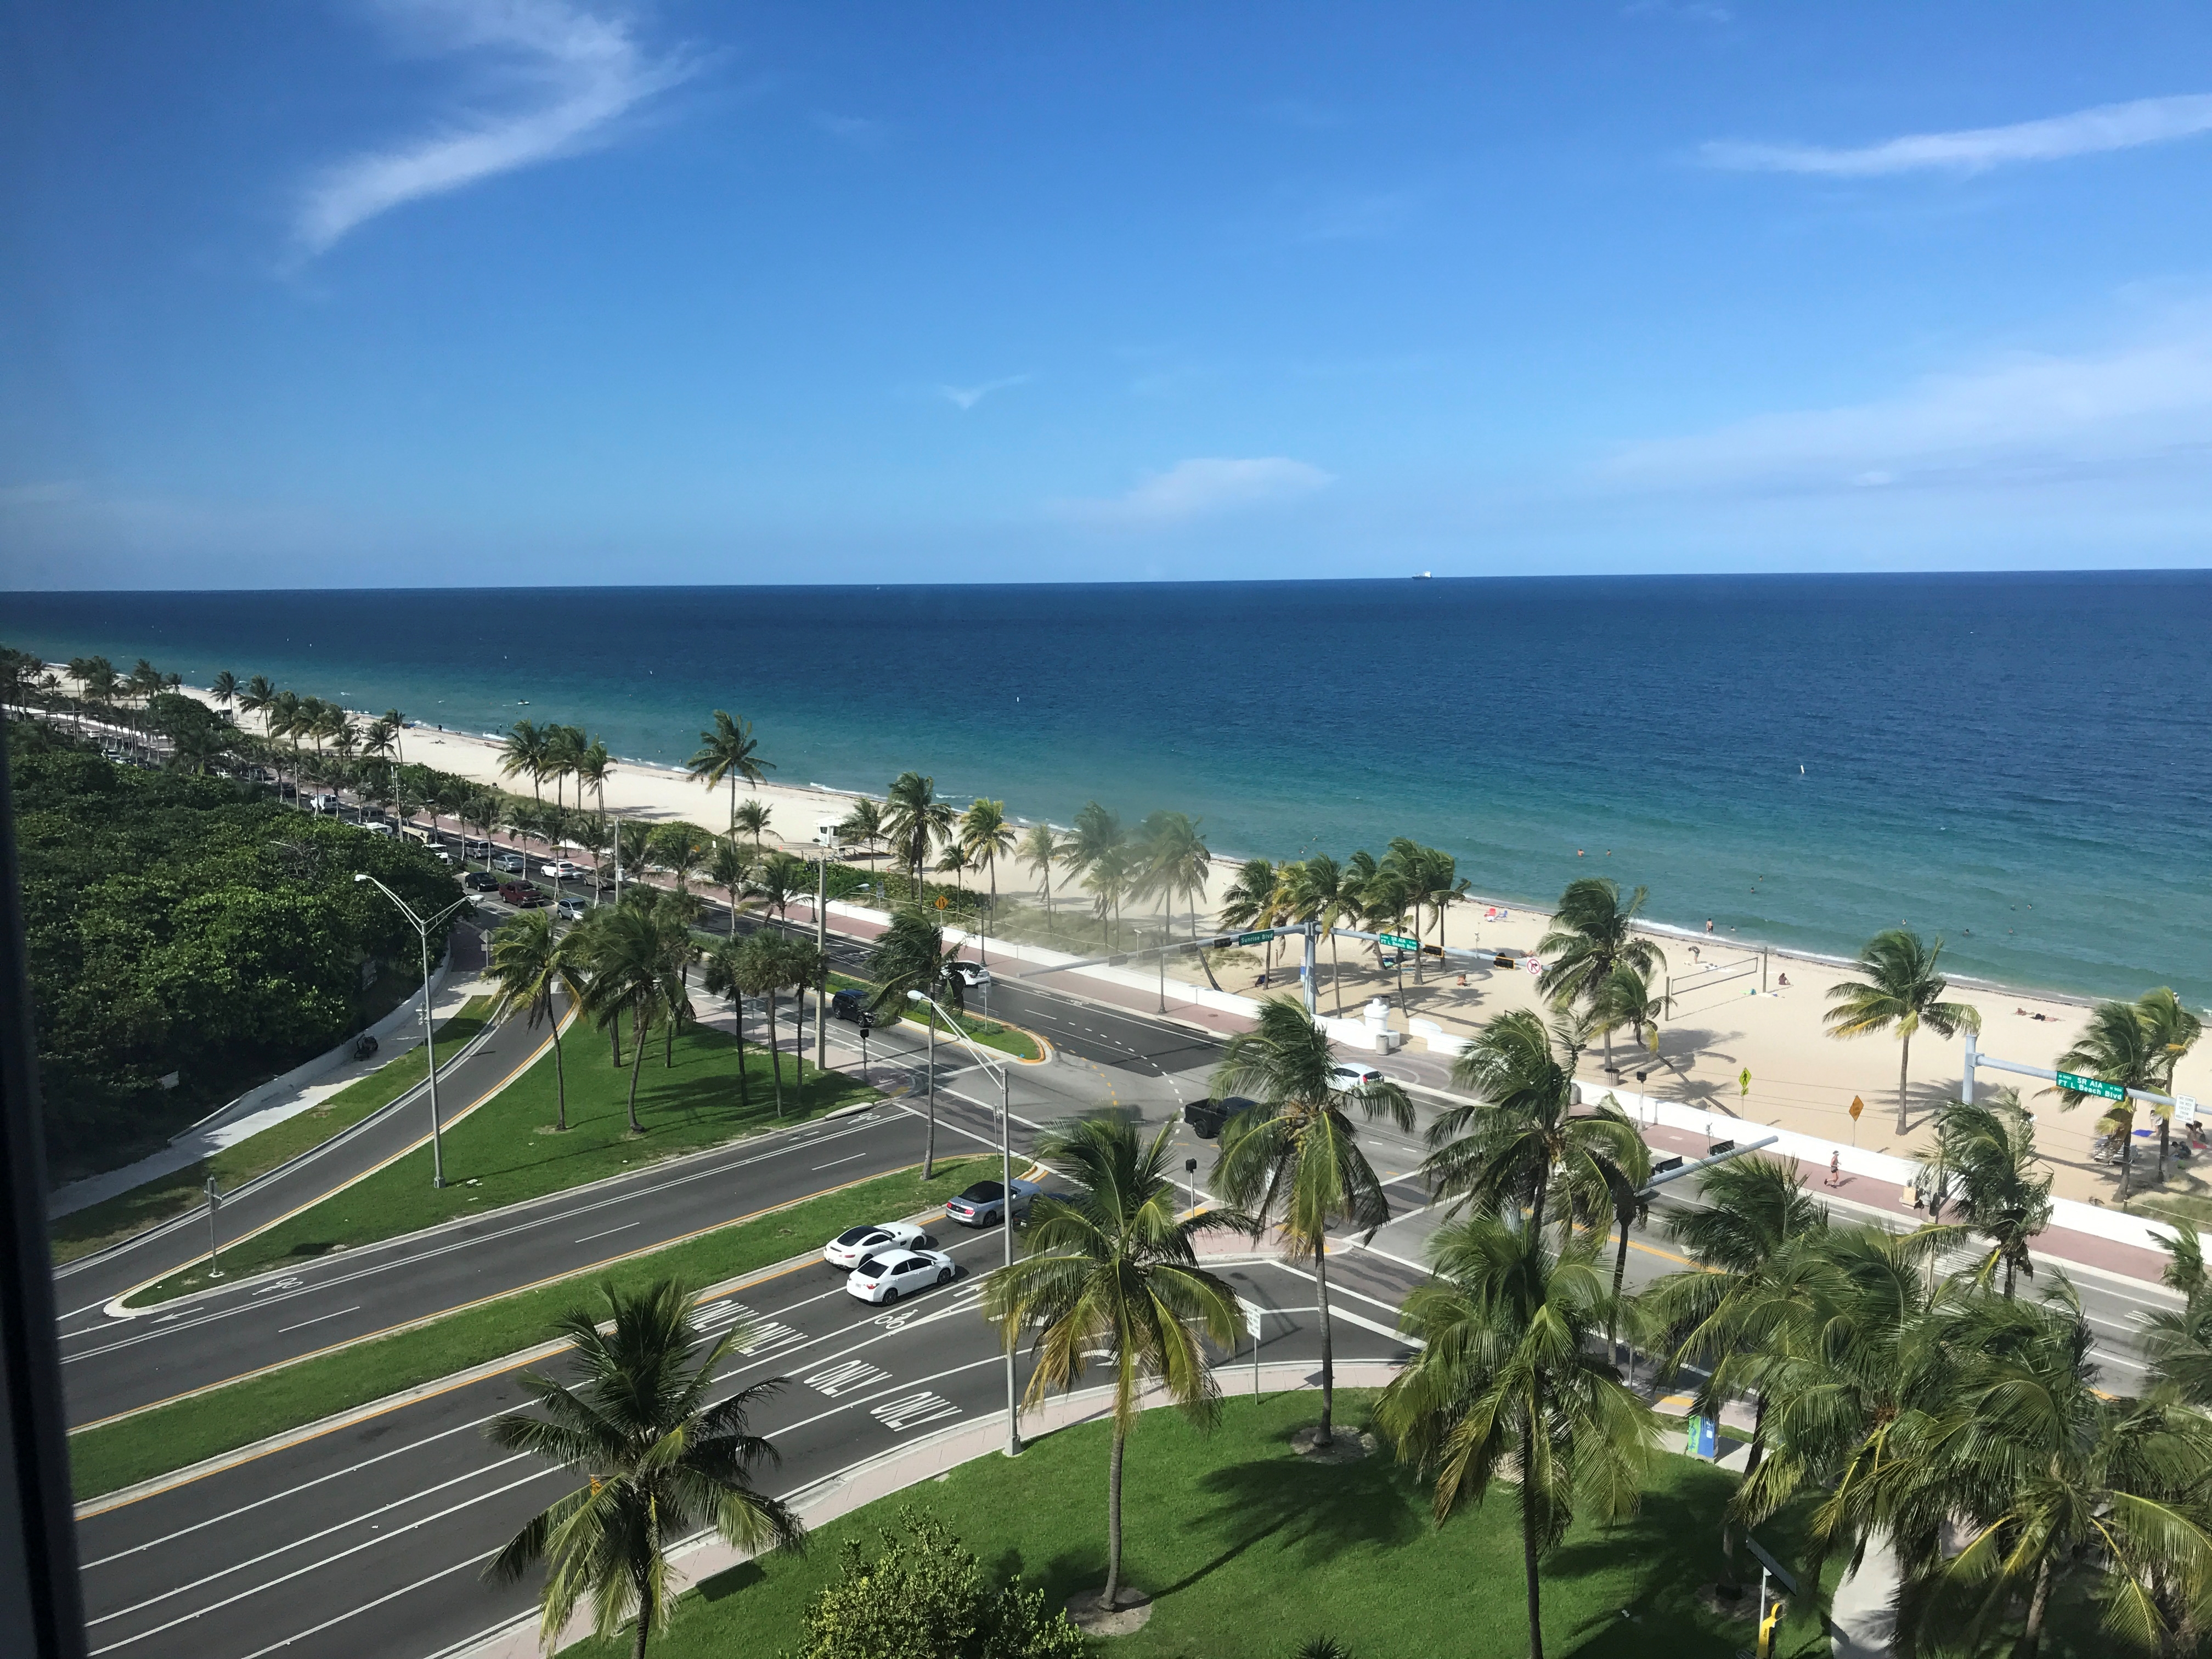 City Guide: Fort Lauderdale Beach & Miami, Florida - City Born Southern